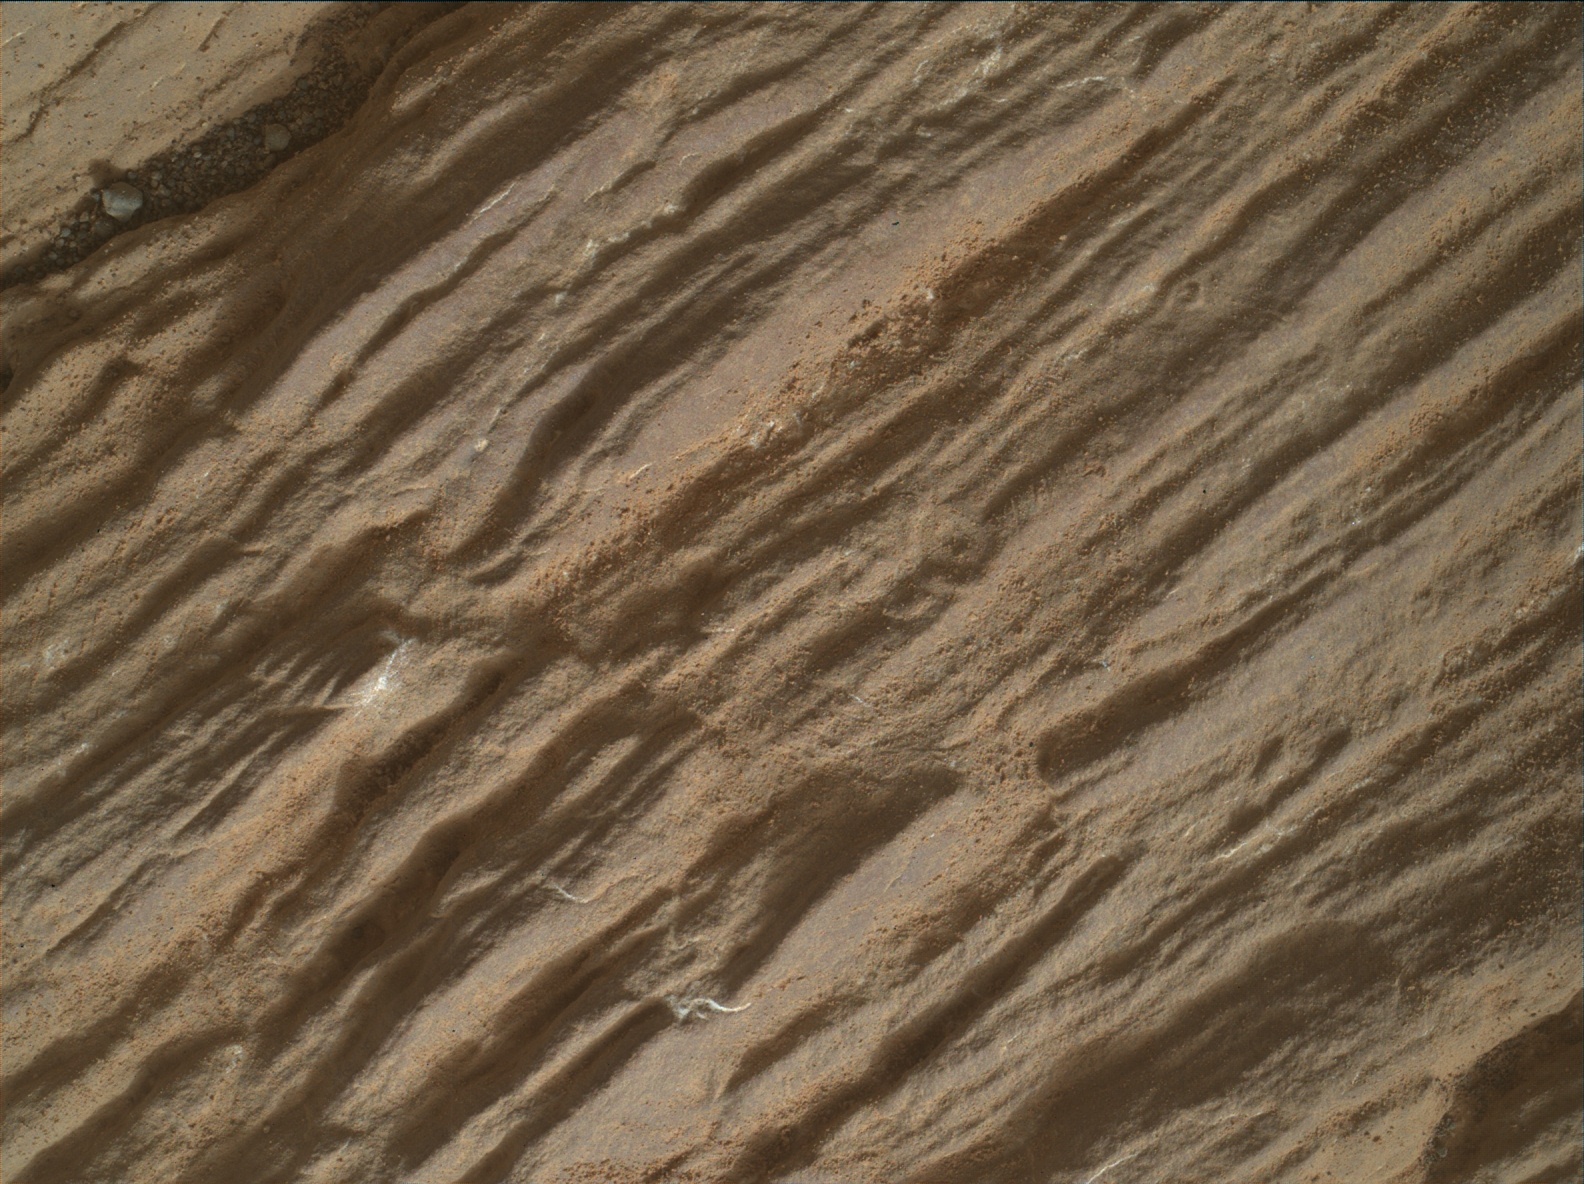 Nasa's Mars rover Curiosity acquired this image using its Mars Hand Lens Imager (MAHLI) on Sol 2471